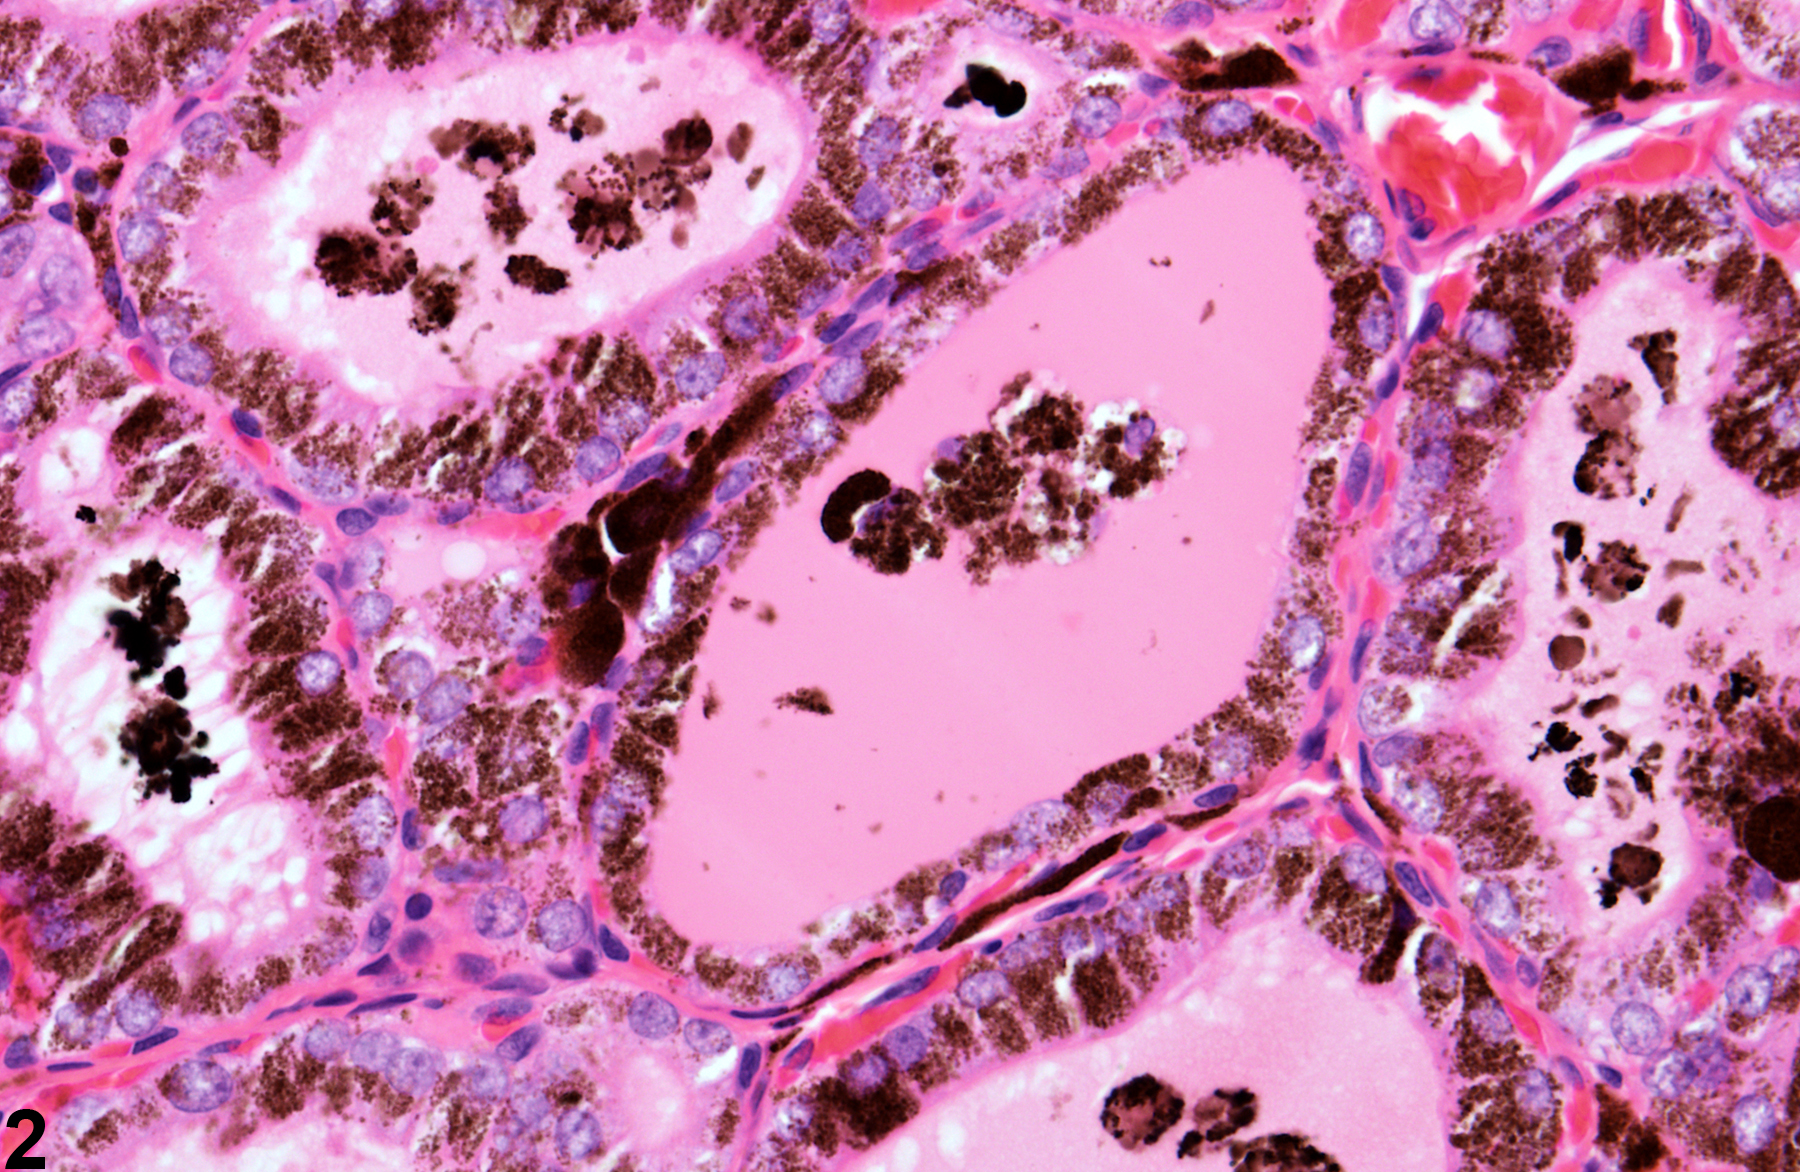 Image of follicle pigment in the thyroid gland from a male F344/N rat in a subchronic study